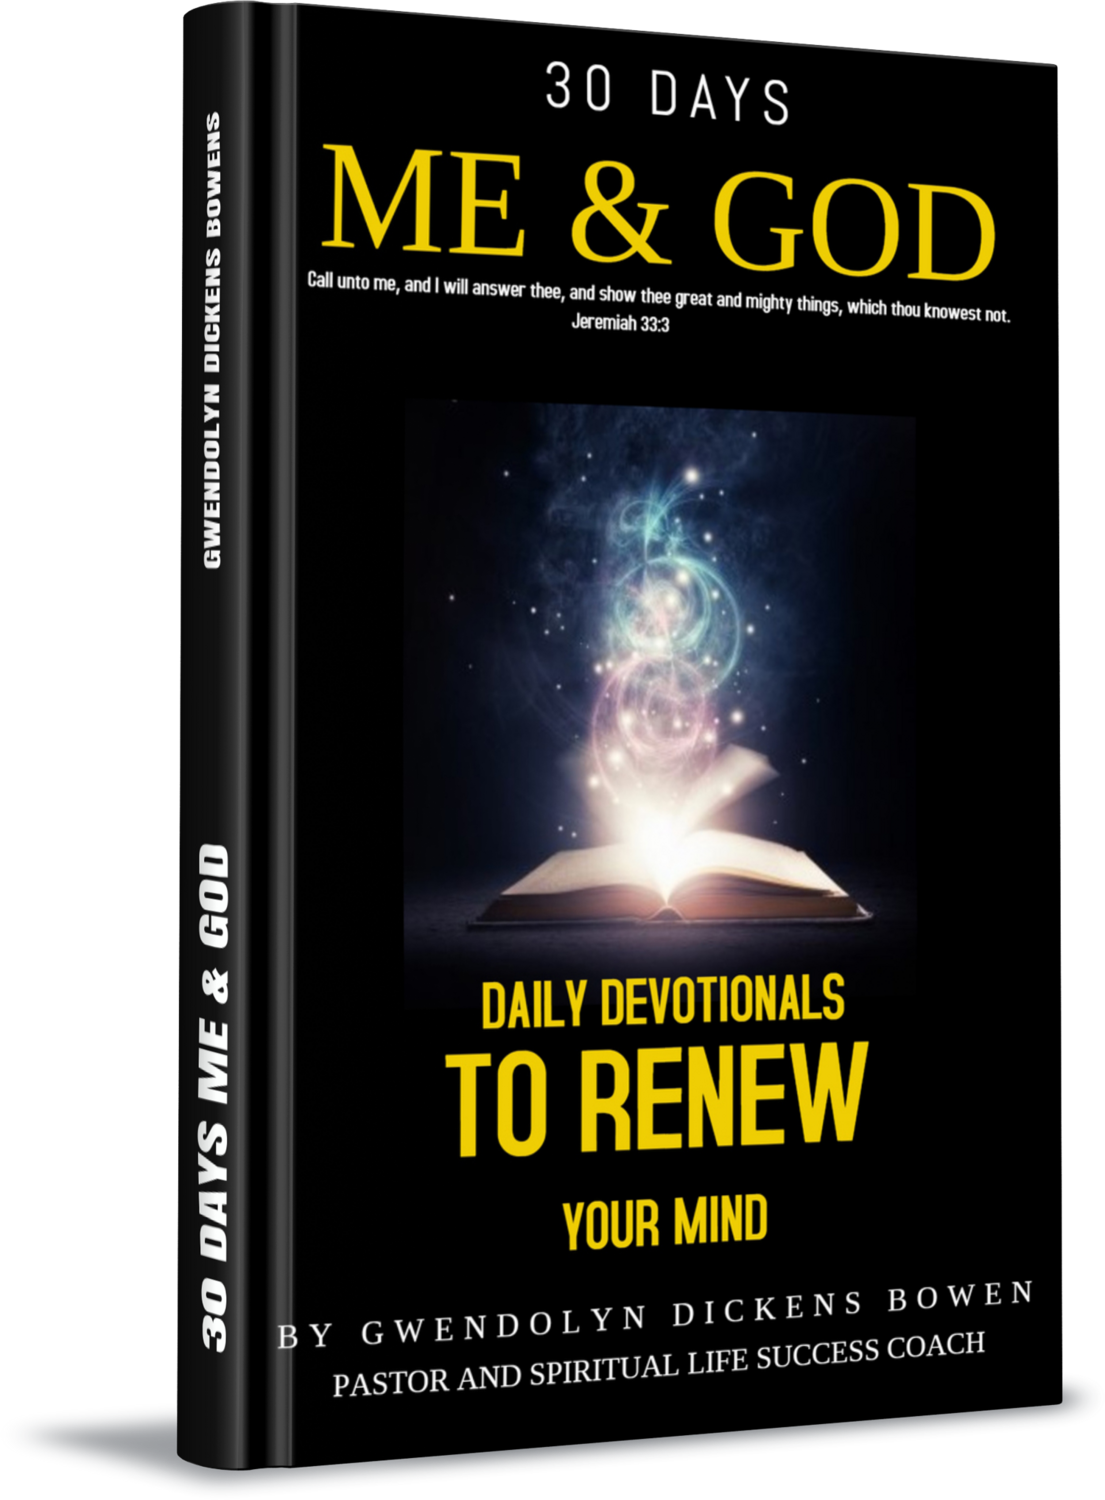 30-Days God & Me: Daily Devotionals To Renew Your Mind